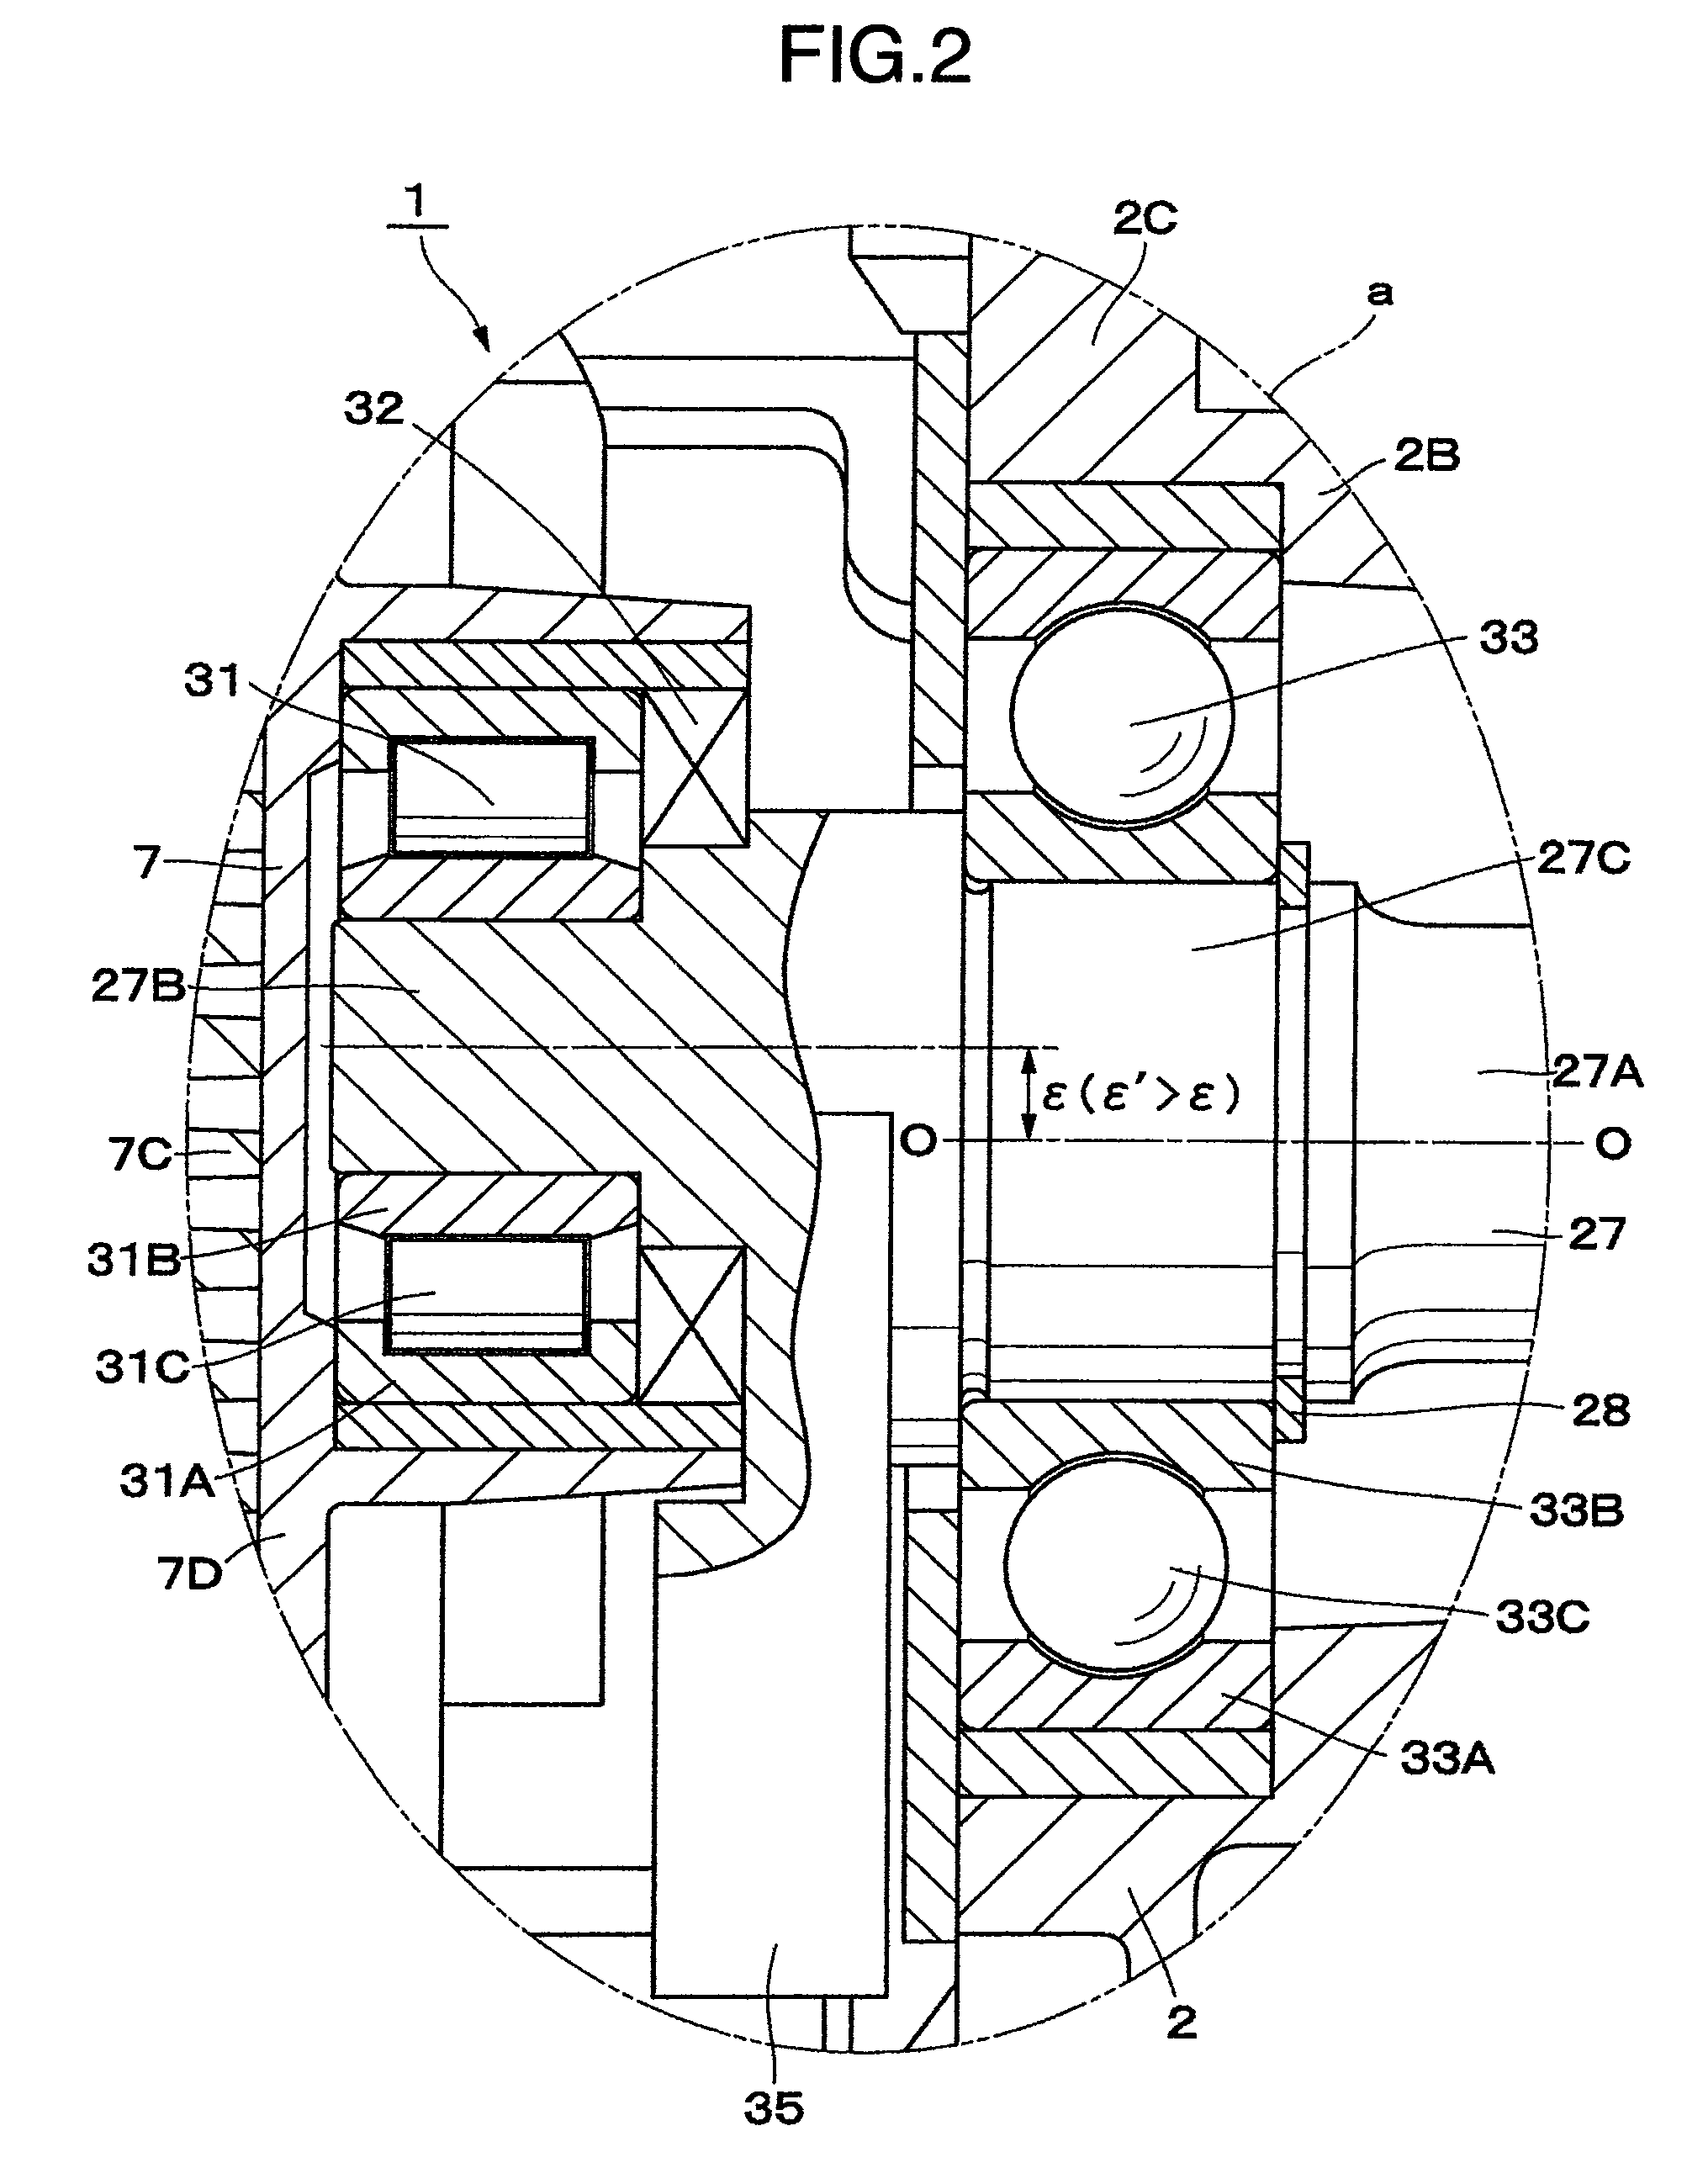 Bearings of a scroll type machine with crank mechanism